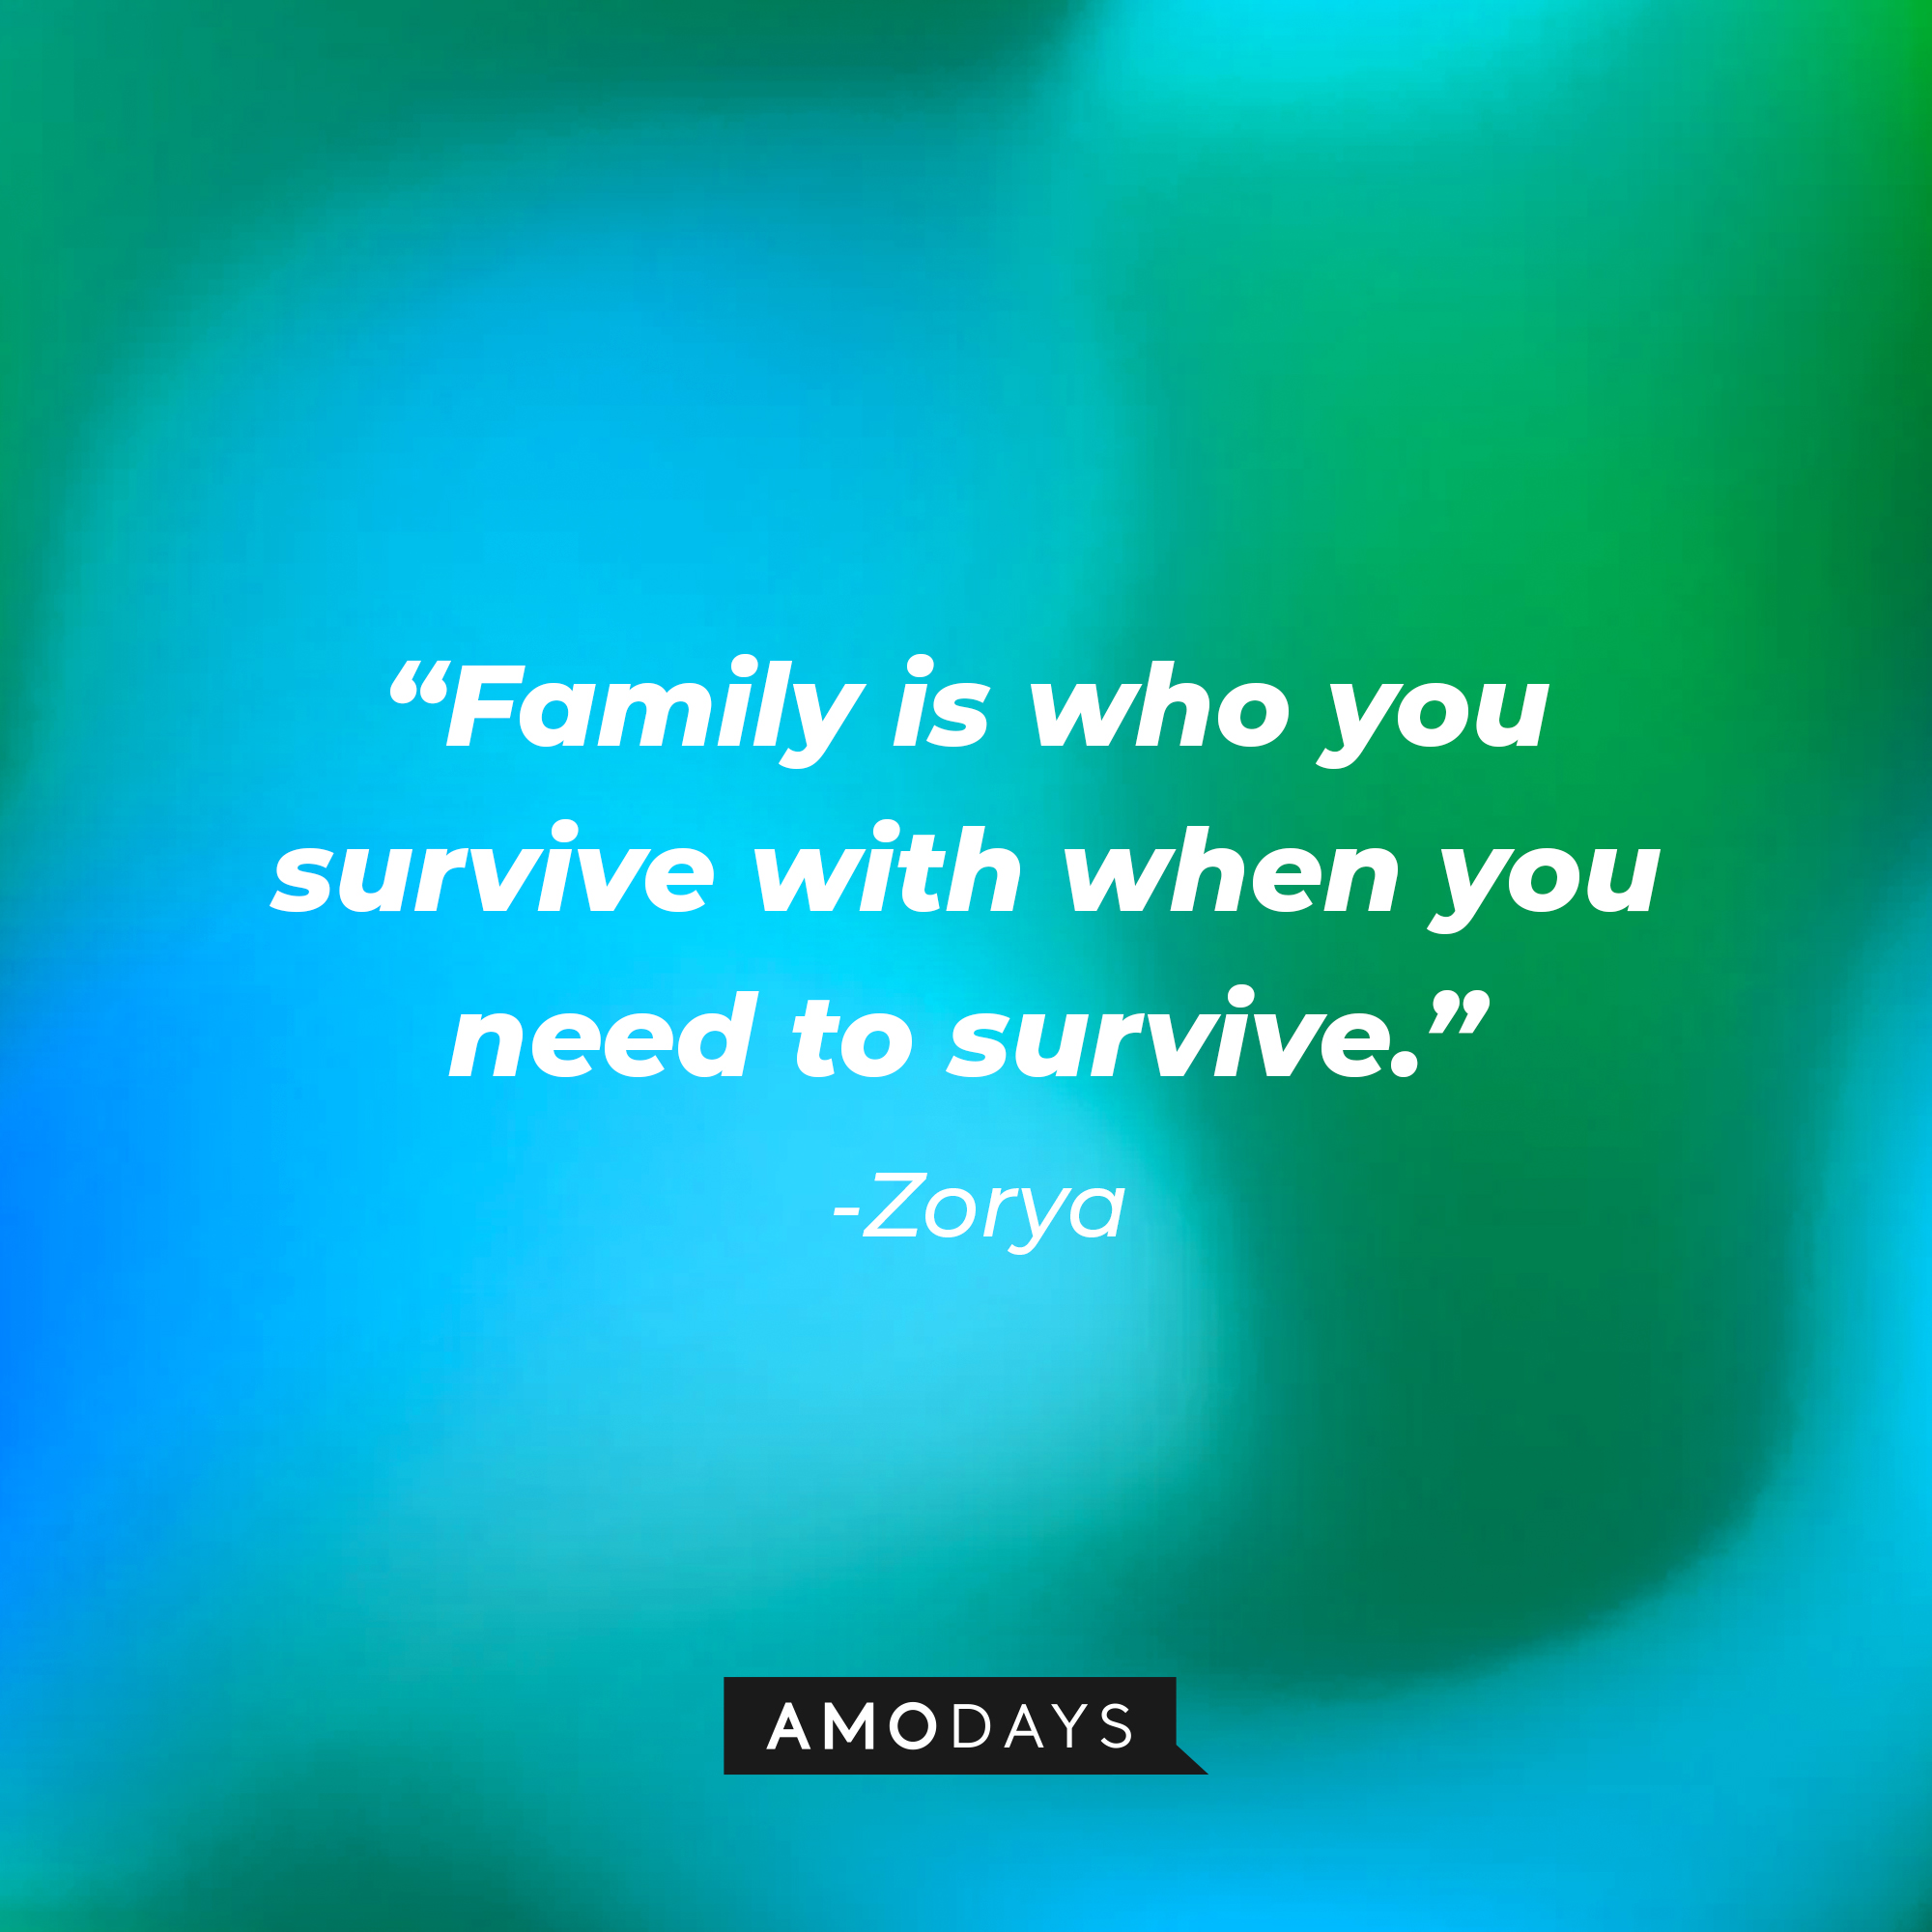 Zorya's quote: "Family is who survive with when you need to survive." | Source: Amodays